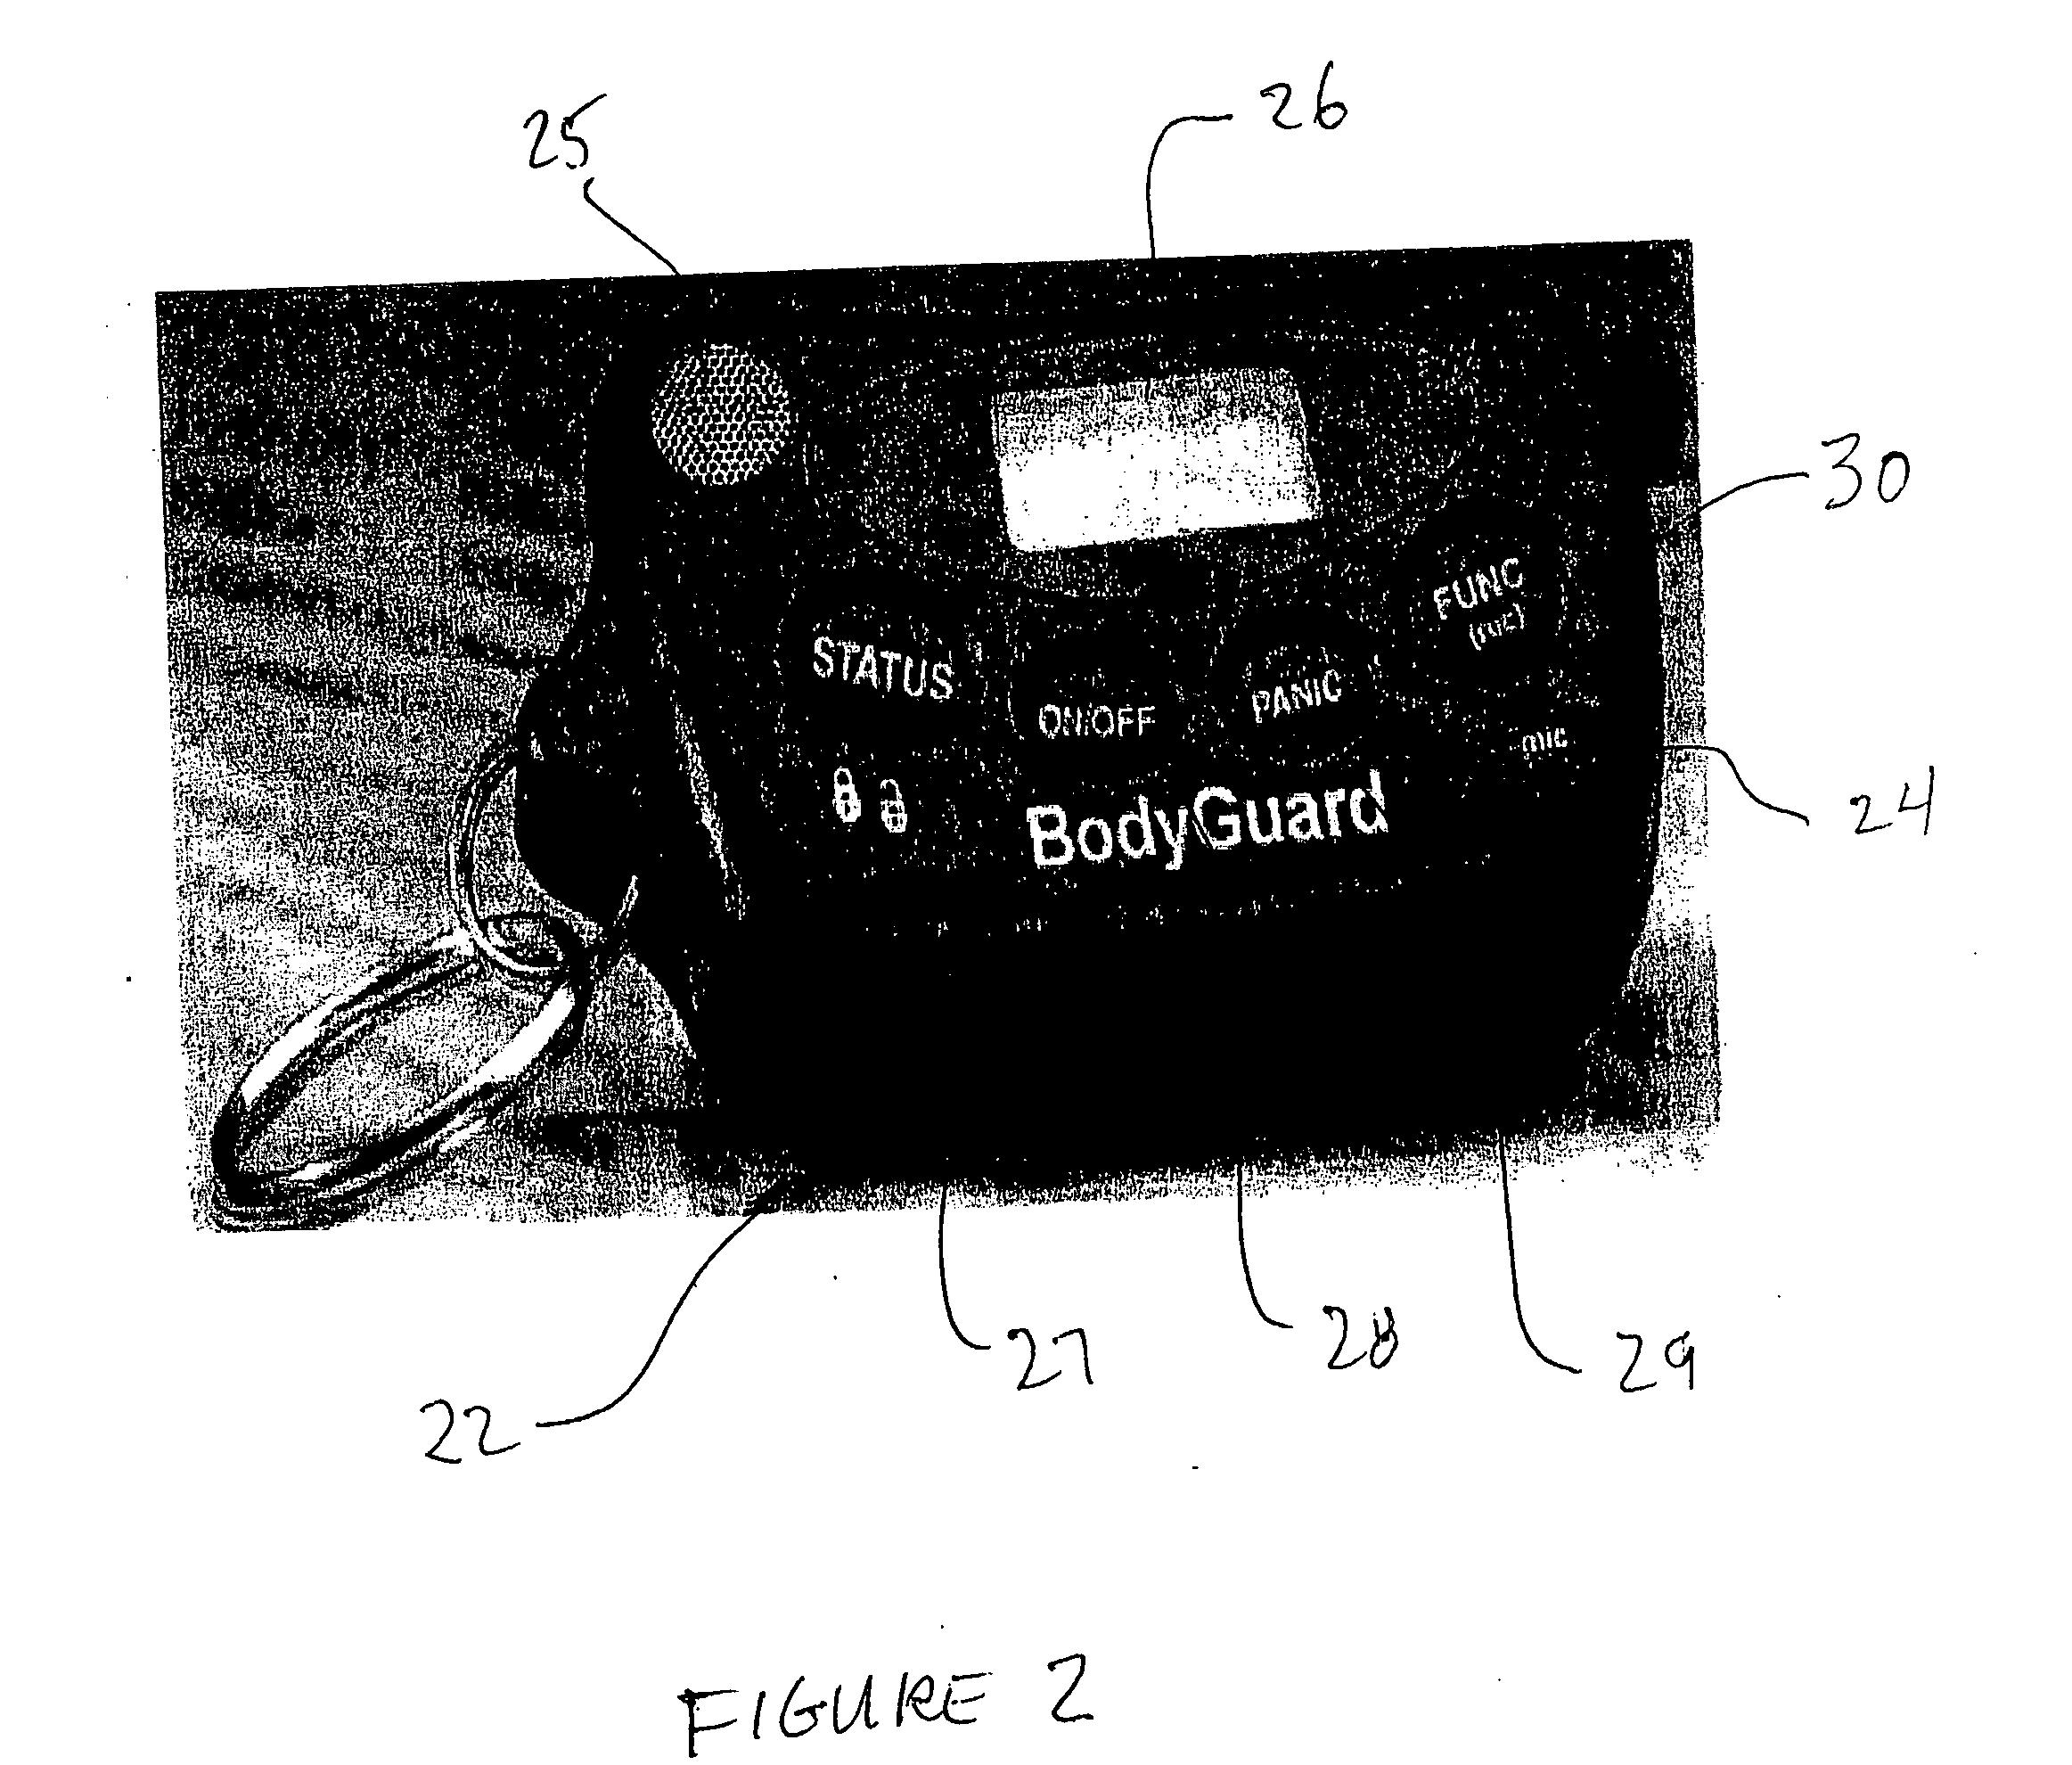 Monitoring and security system and method